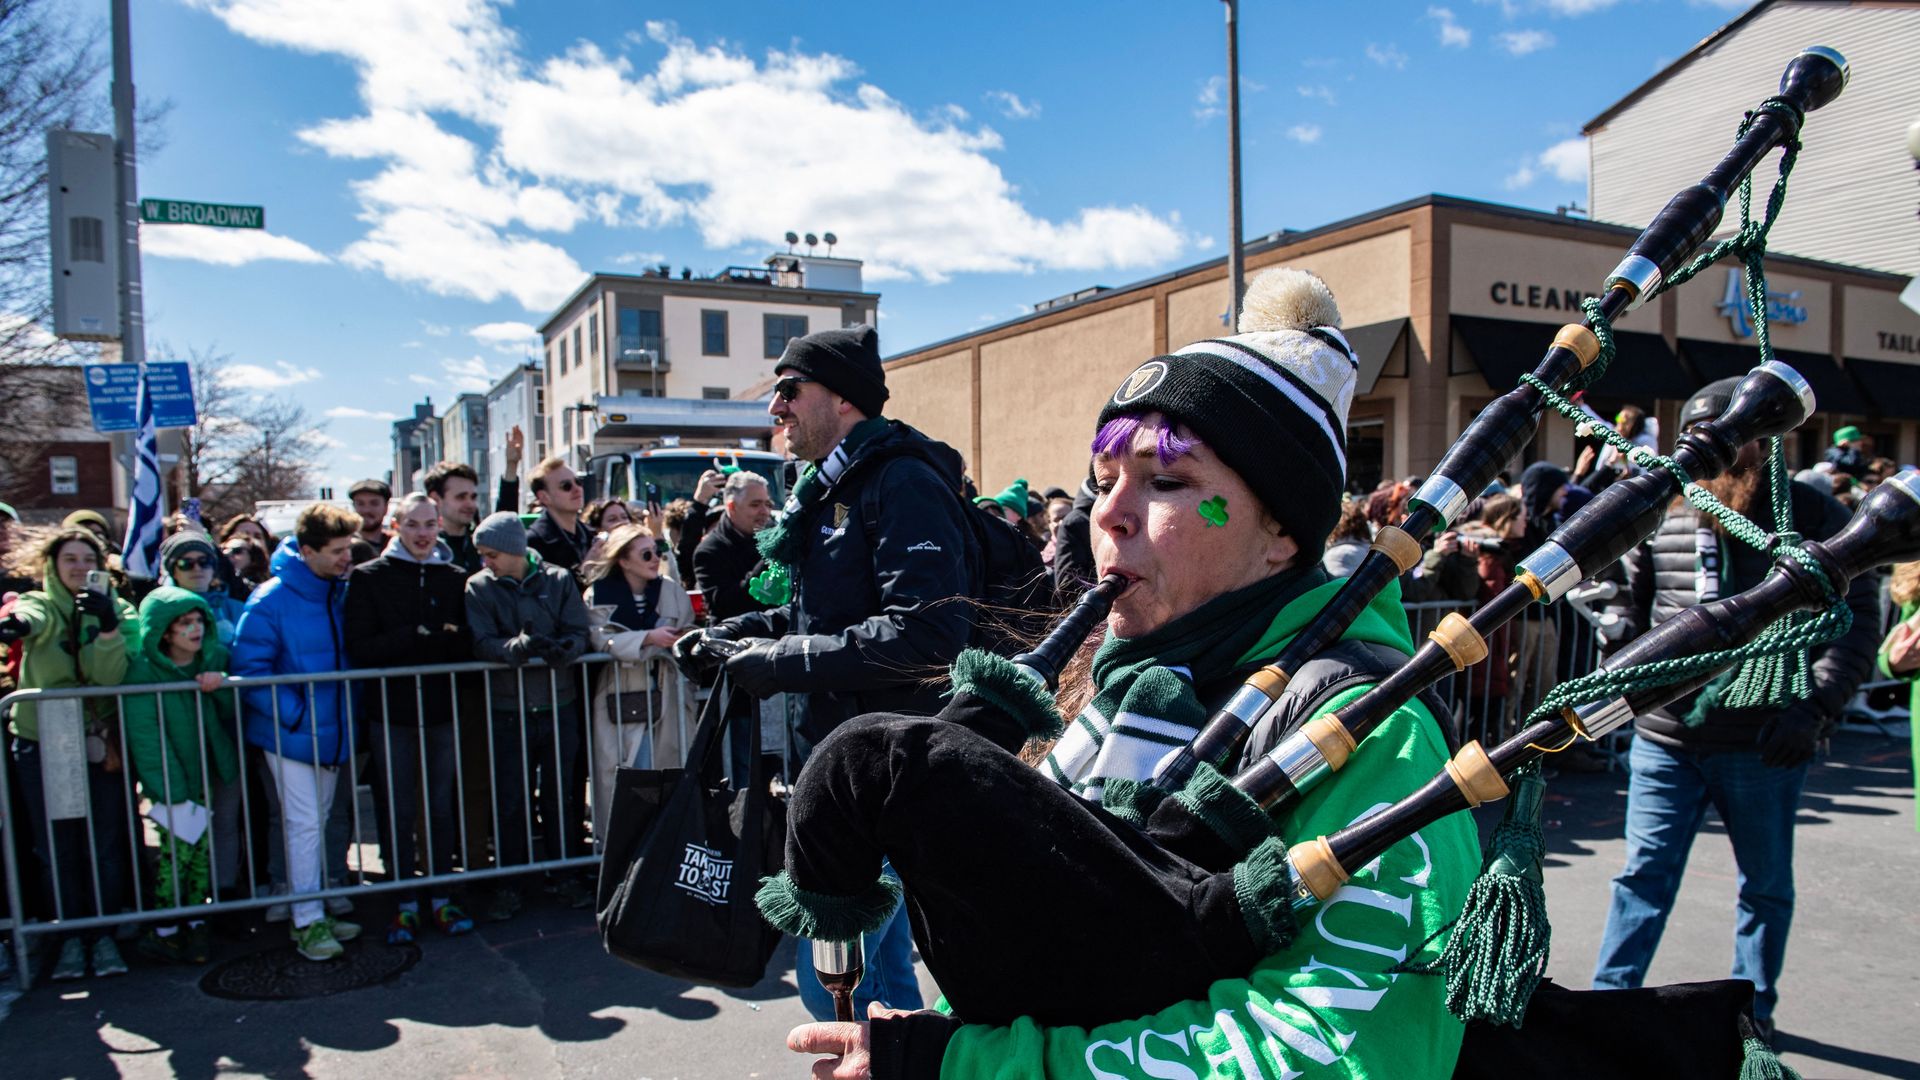 Boston St. Patrick's Day parade guide The route, the best views and